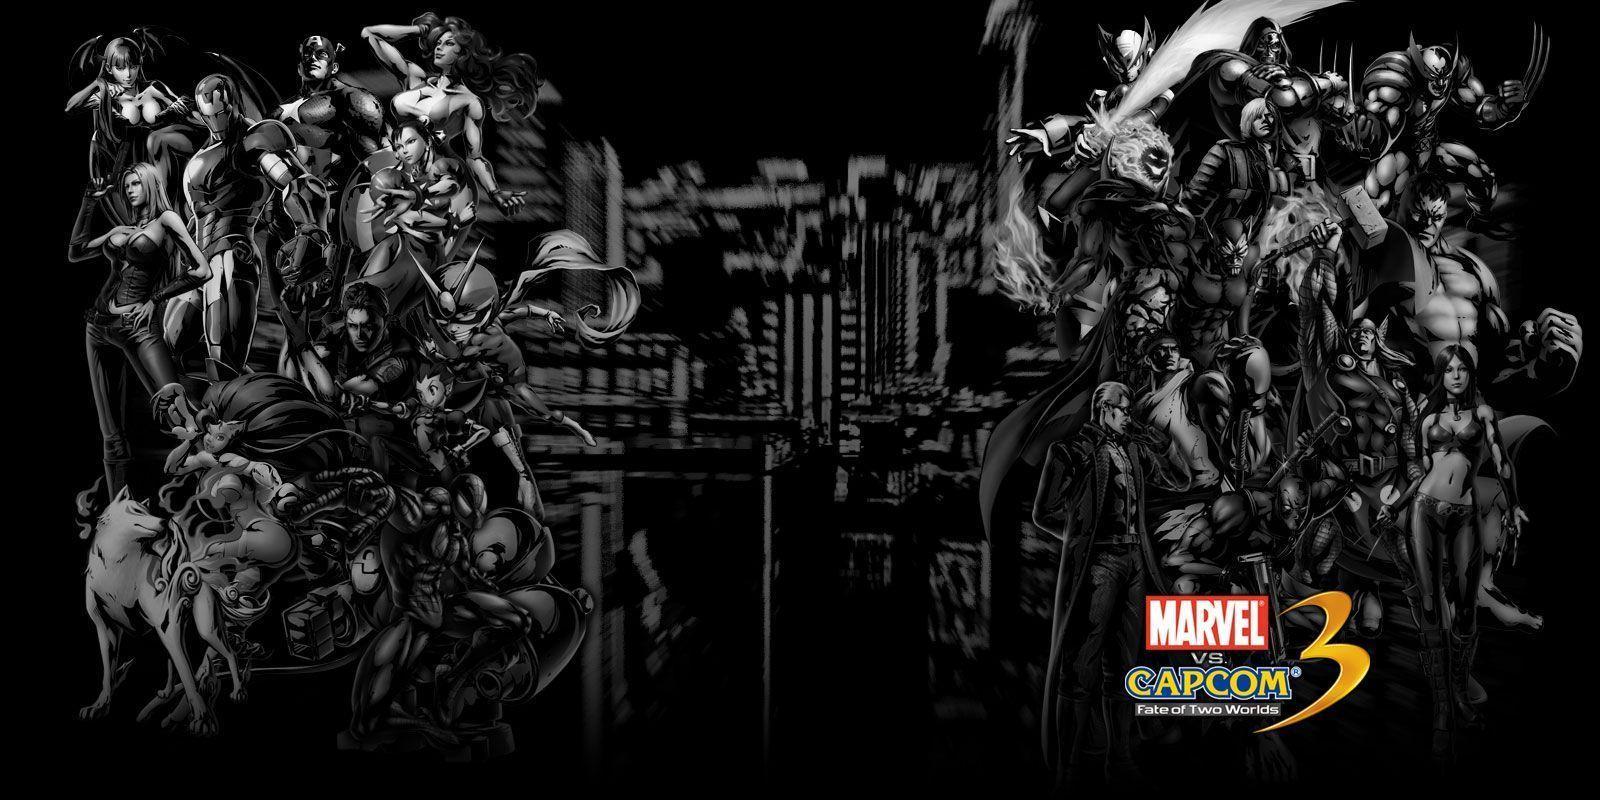 Marvel Vs Capcom 3: Fate of Two Worlds Wallpaper For PS3